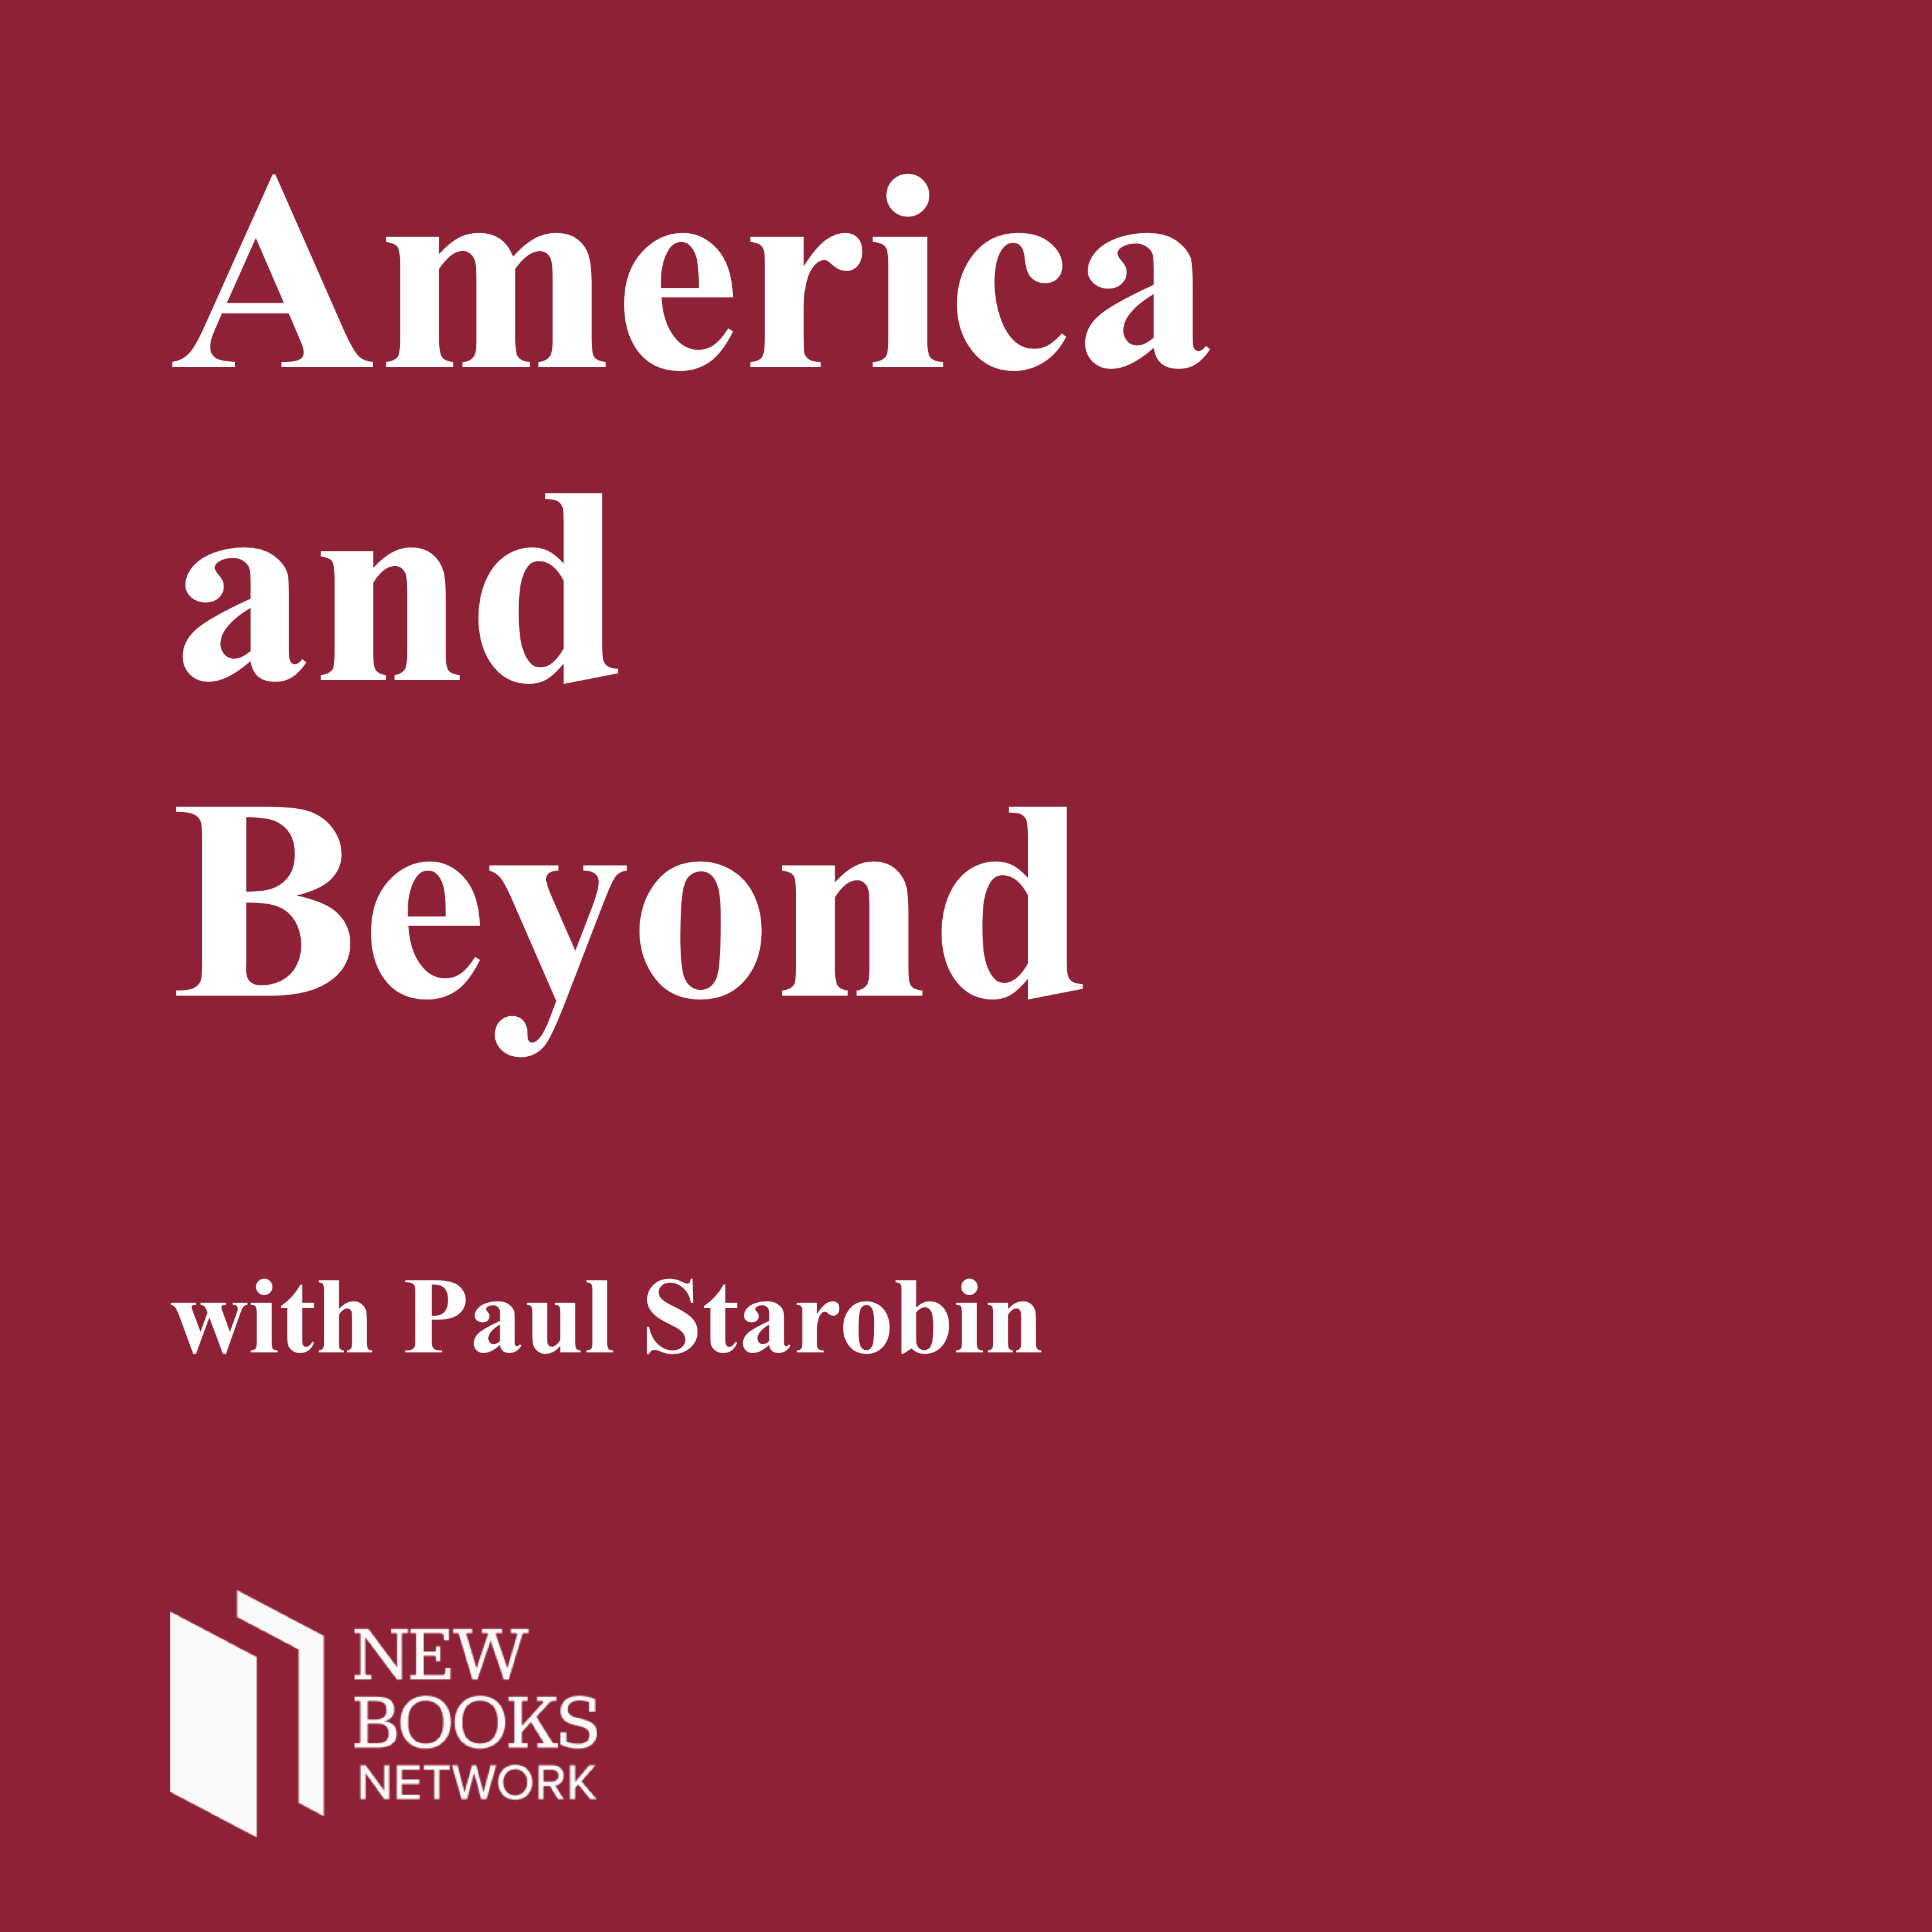 America and Beyond with Paul Starobin